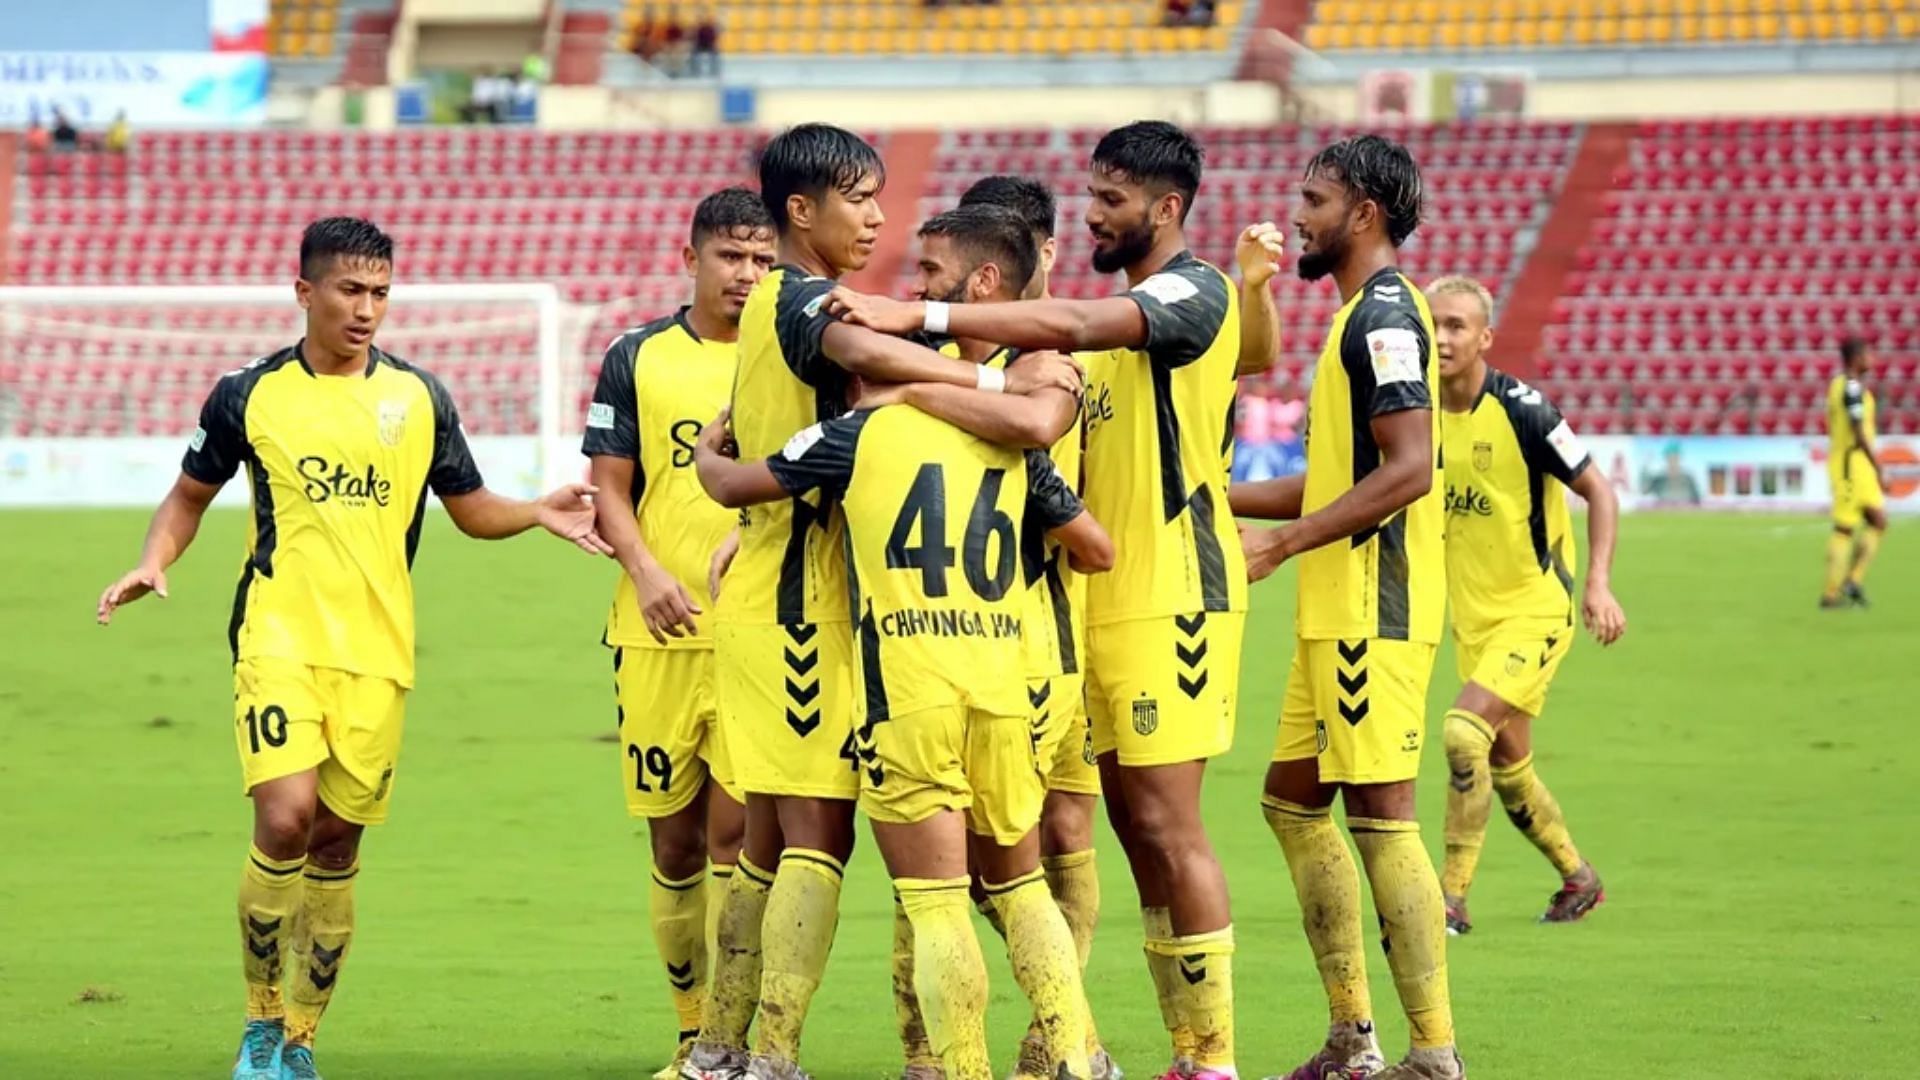 Can Hyderabad FC rally together and produce a stellar performance to bring home their first win of the season? (Image courtesy: indiansuperleague.com)